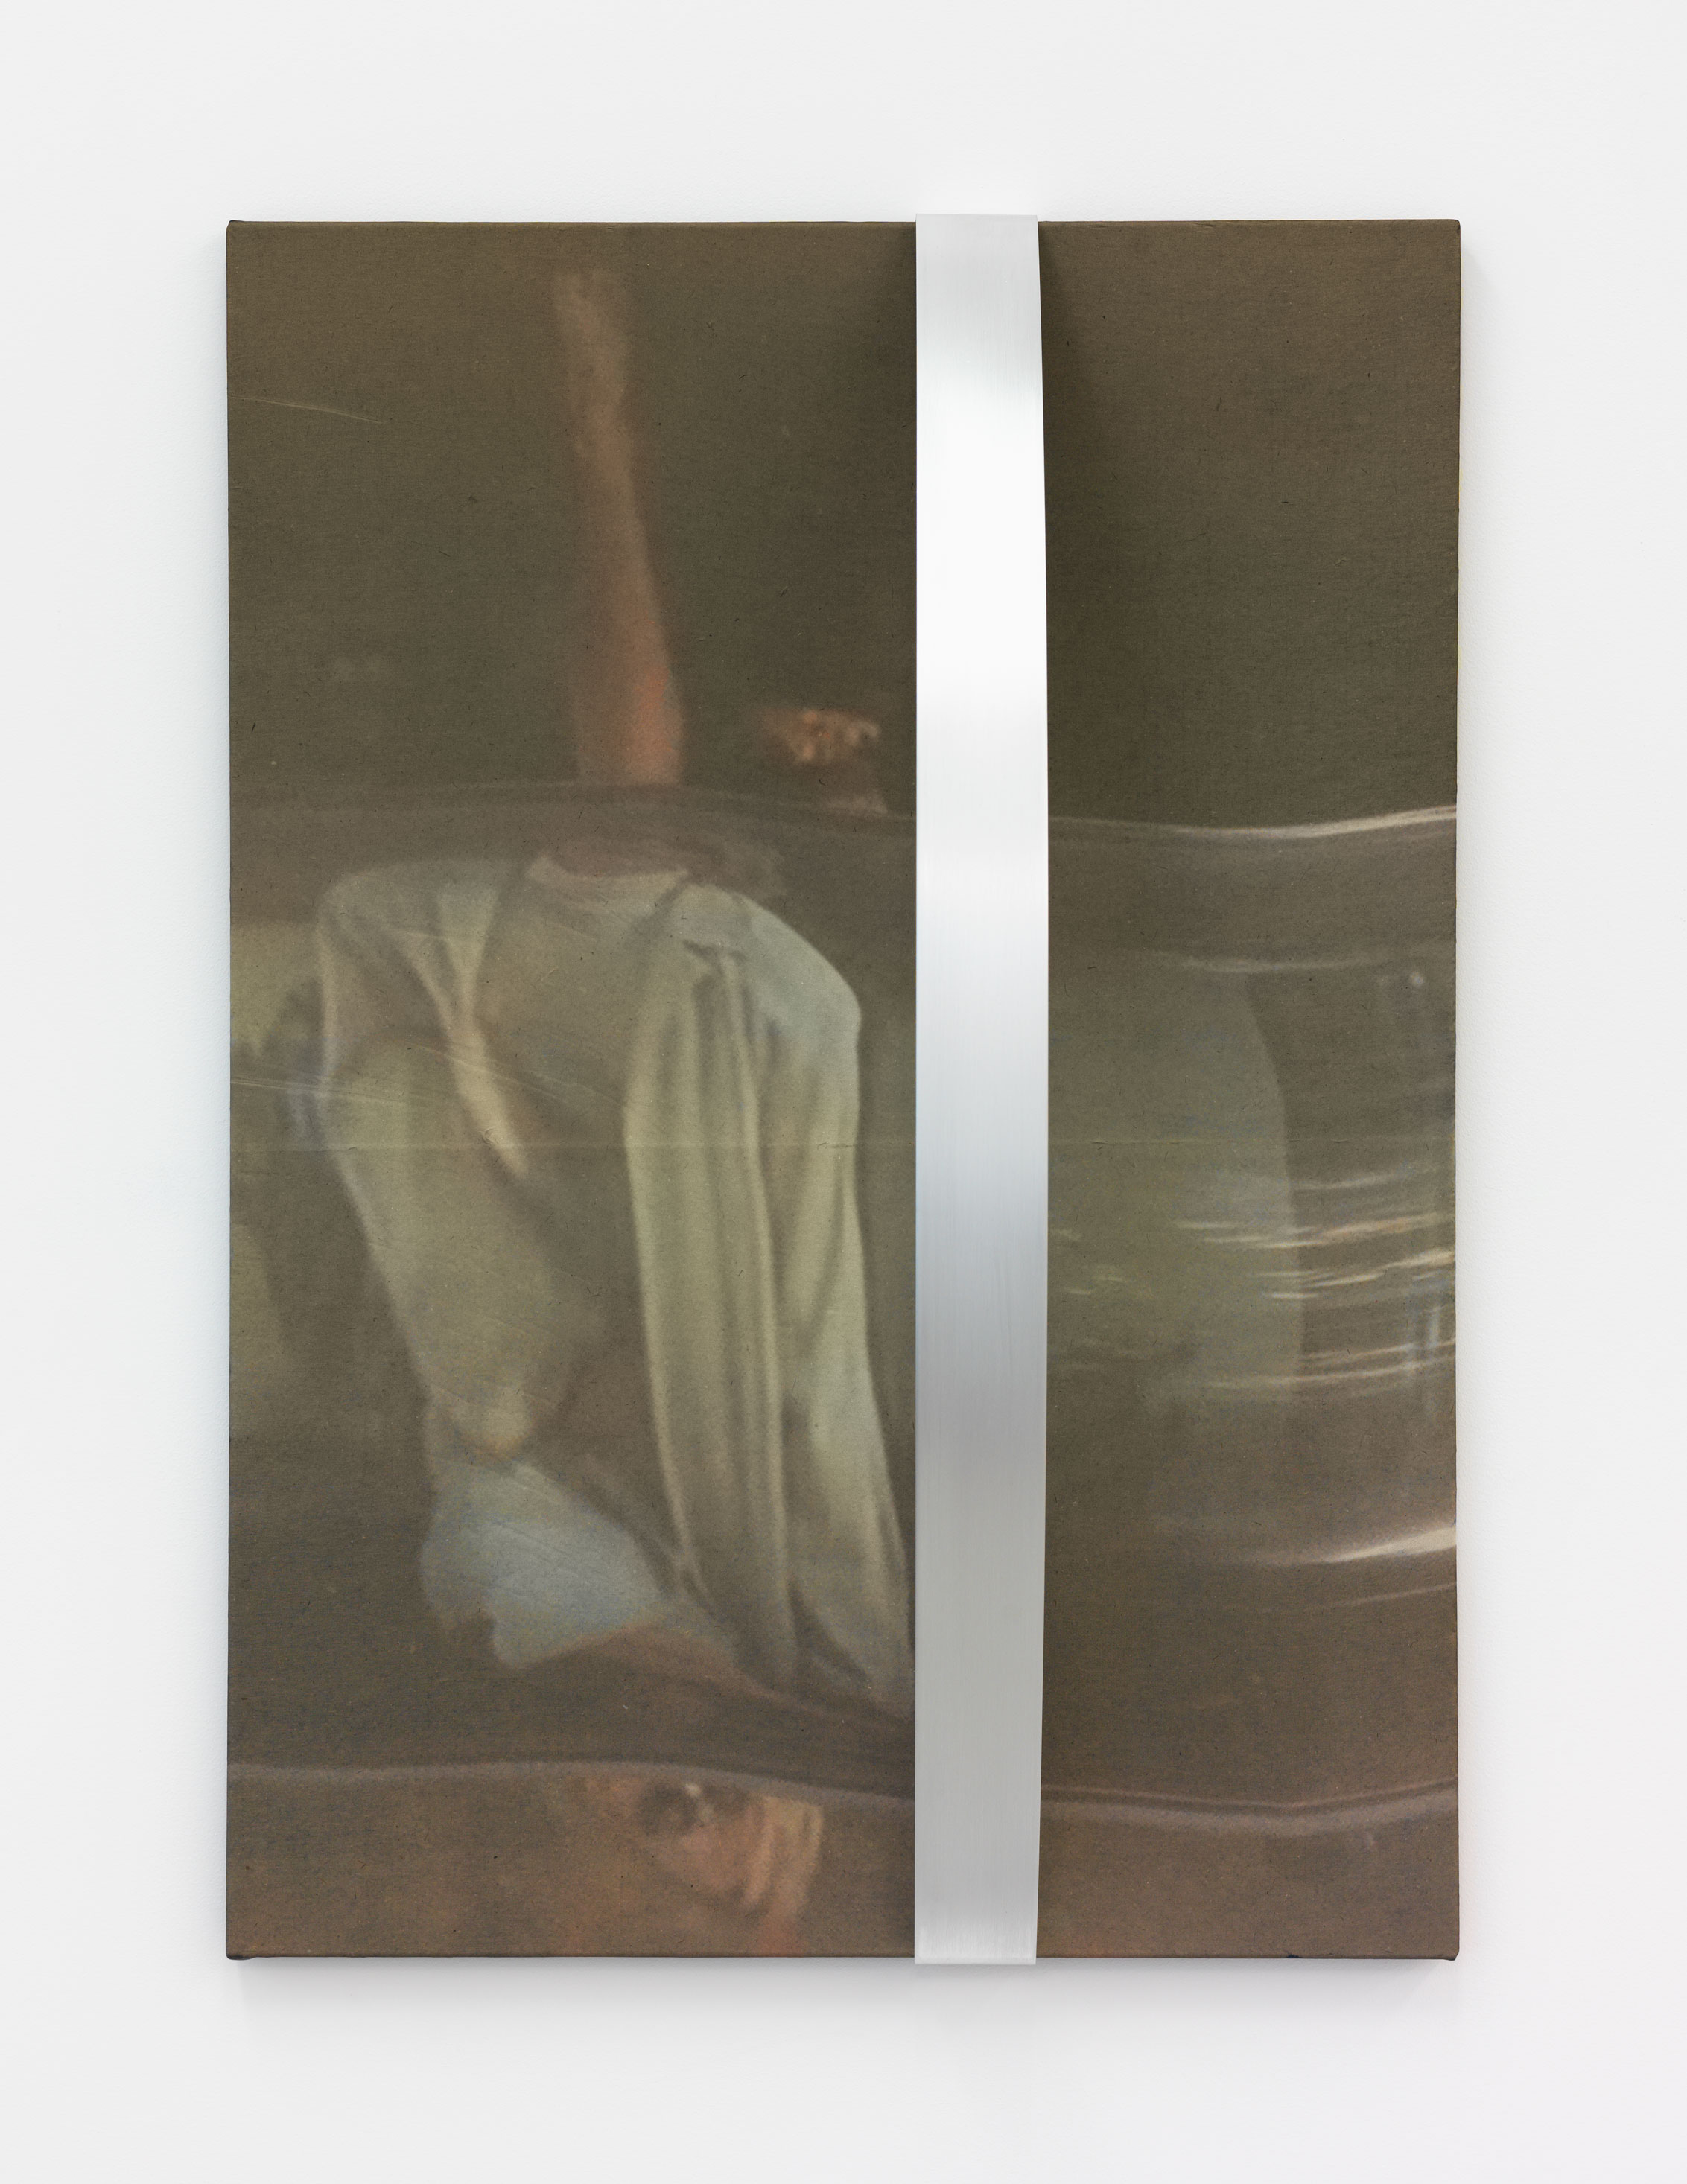 Ariane Schick, Eve's Foyer, 2016, canvas, paper, printed organza and aluminum, 24h x 35w in.